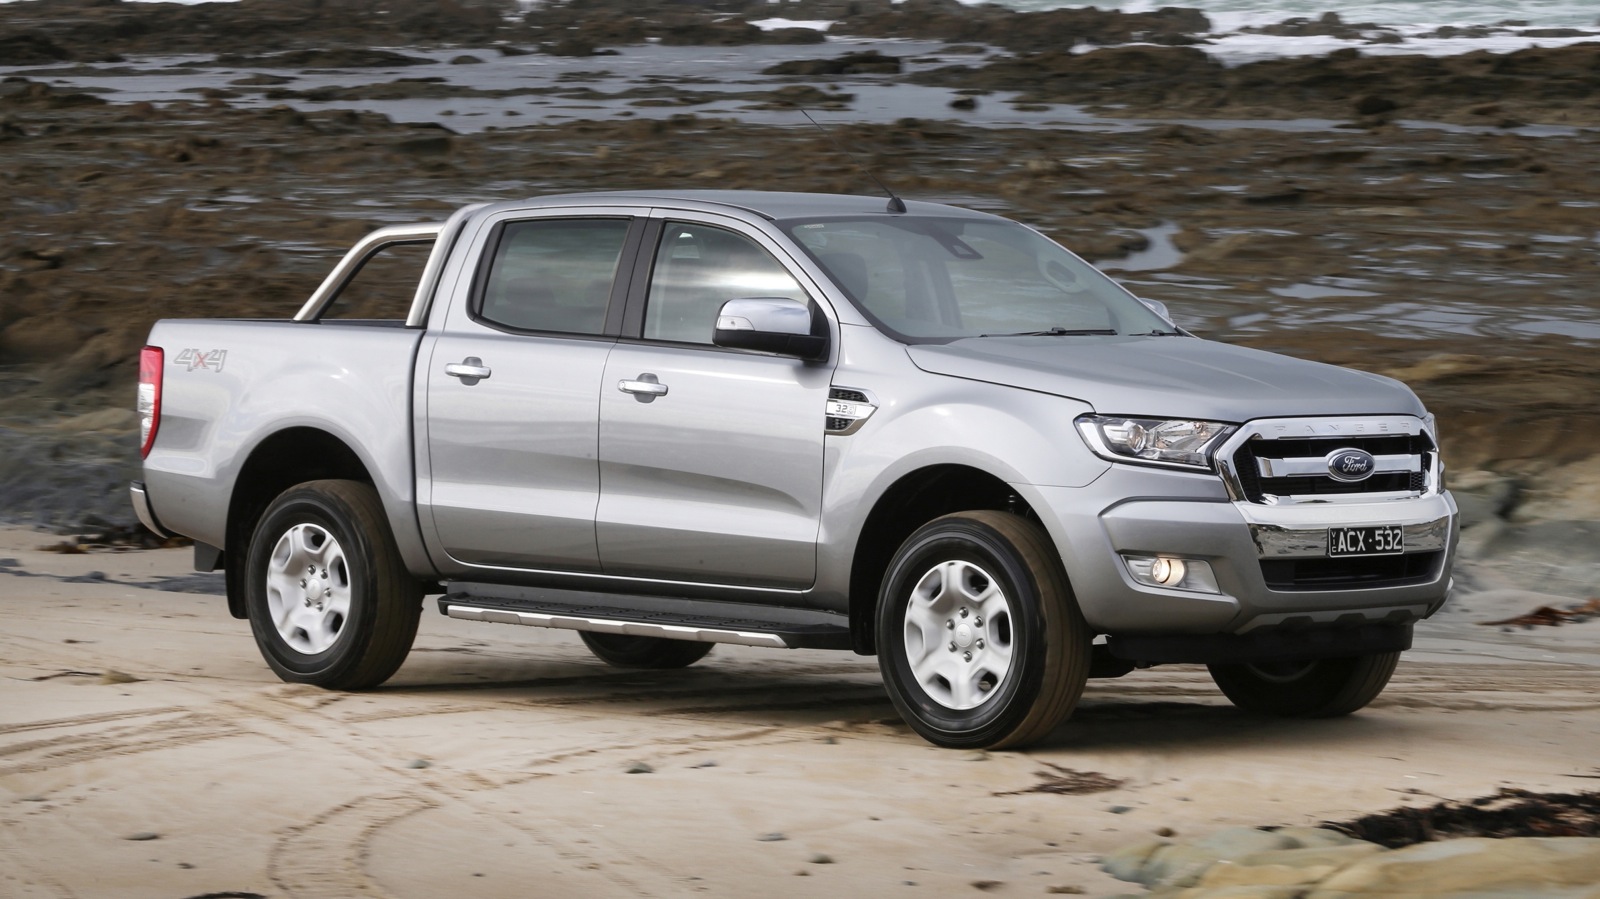 2014 Ford Ranger Specs Price And Release Date The 2014 Ford Ranger ...